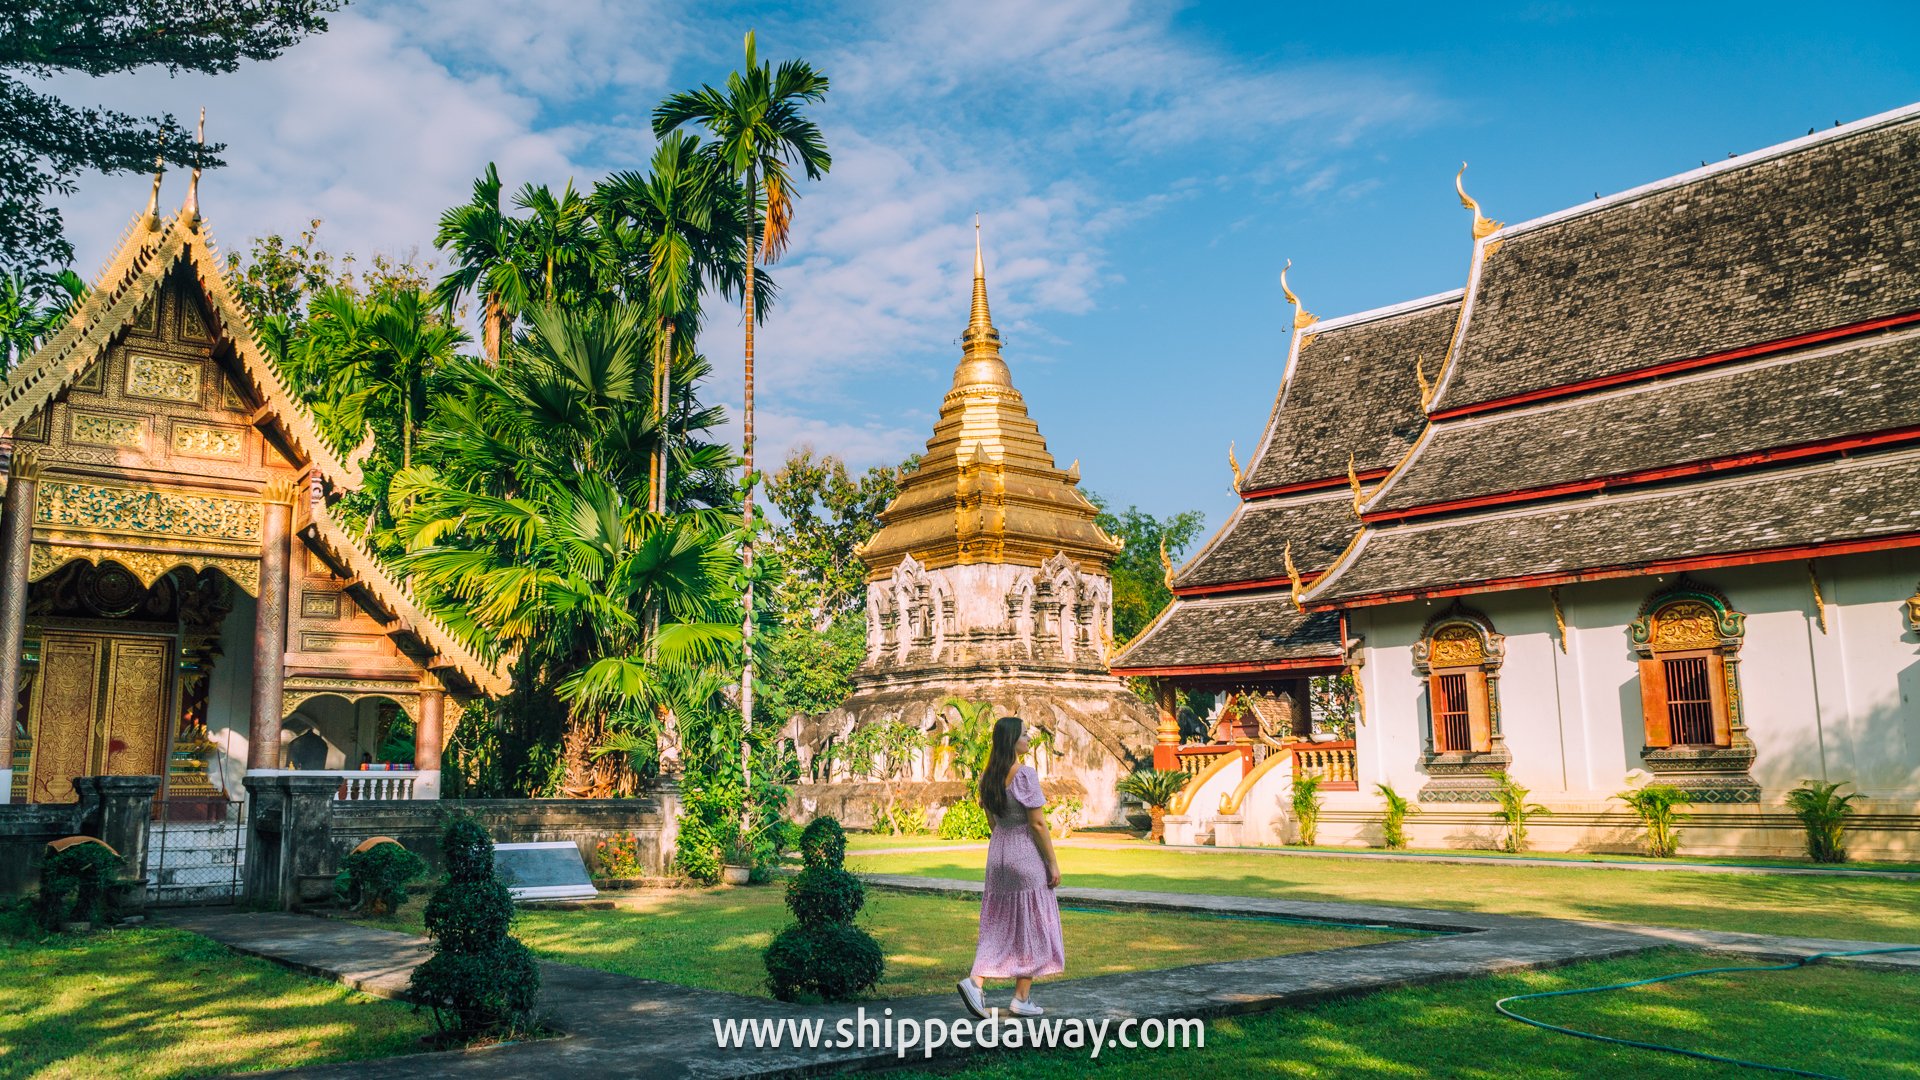 Best time to visit Chiang Mai - best season to visit Chiang Mai - when to visit Chiang Mai - is rainy season good to visit Chiang Mai - is burning season bad